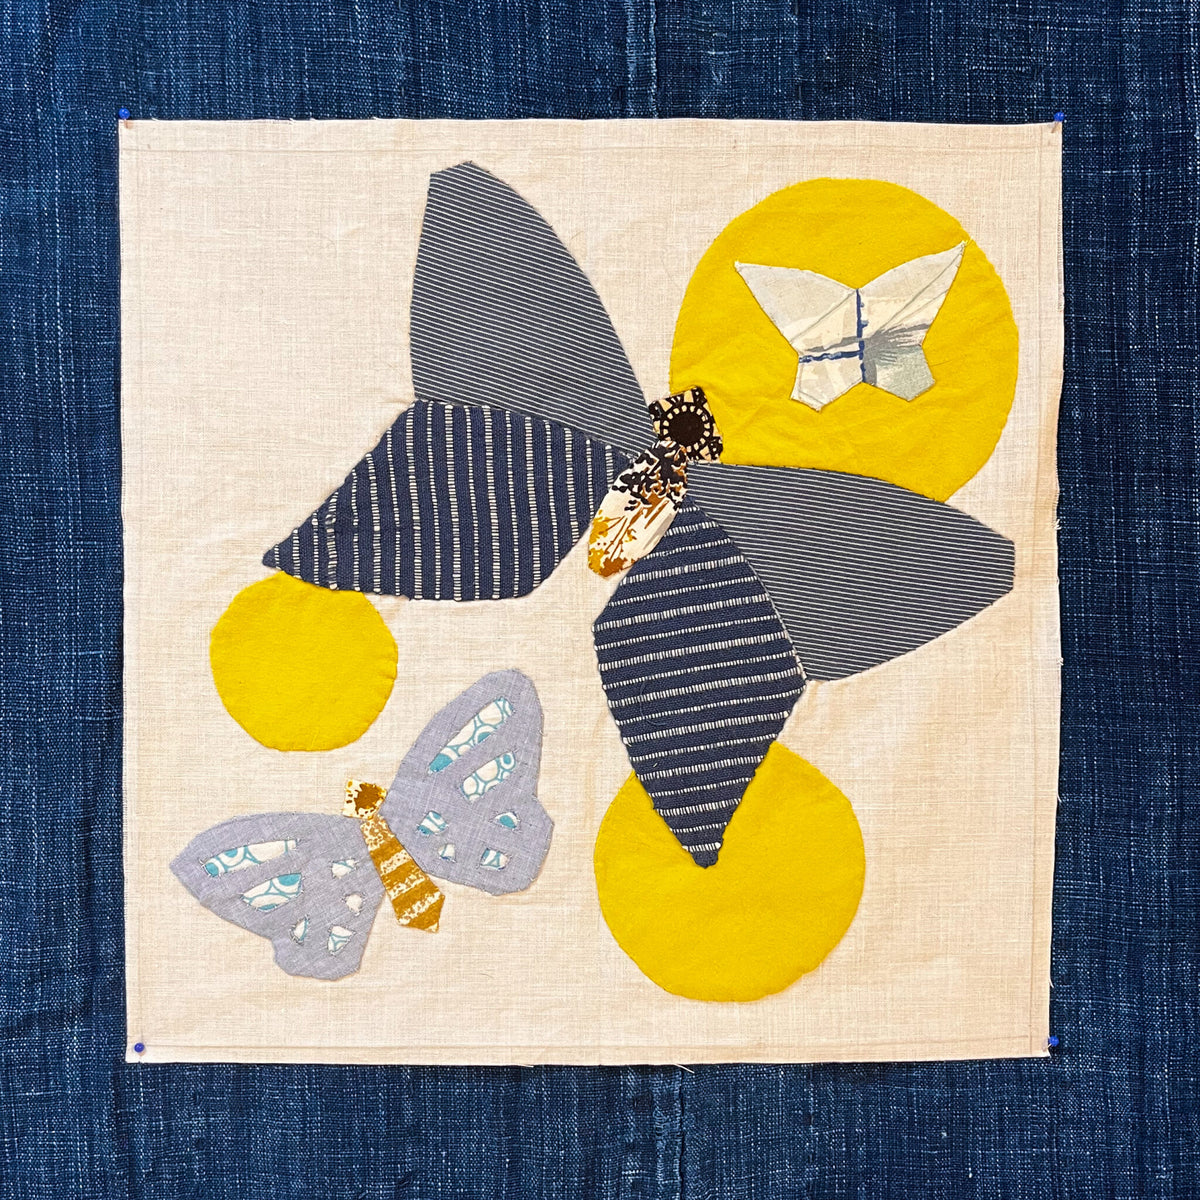 Hand-Sewn Quilting Series I: a six week exploration